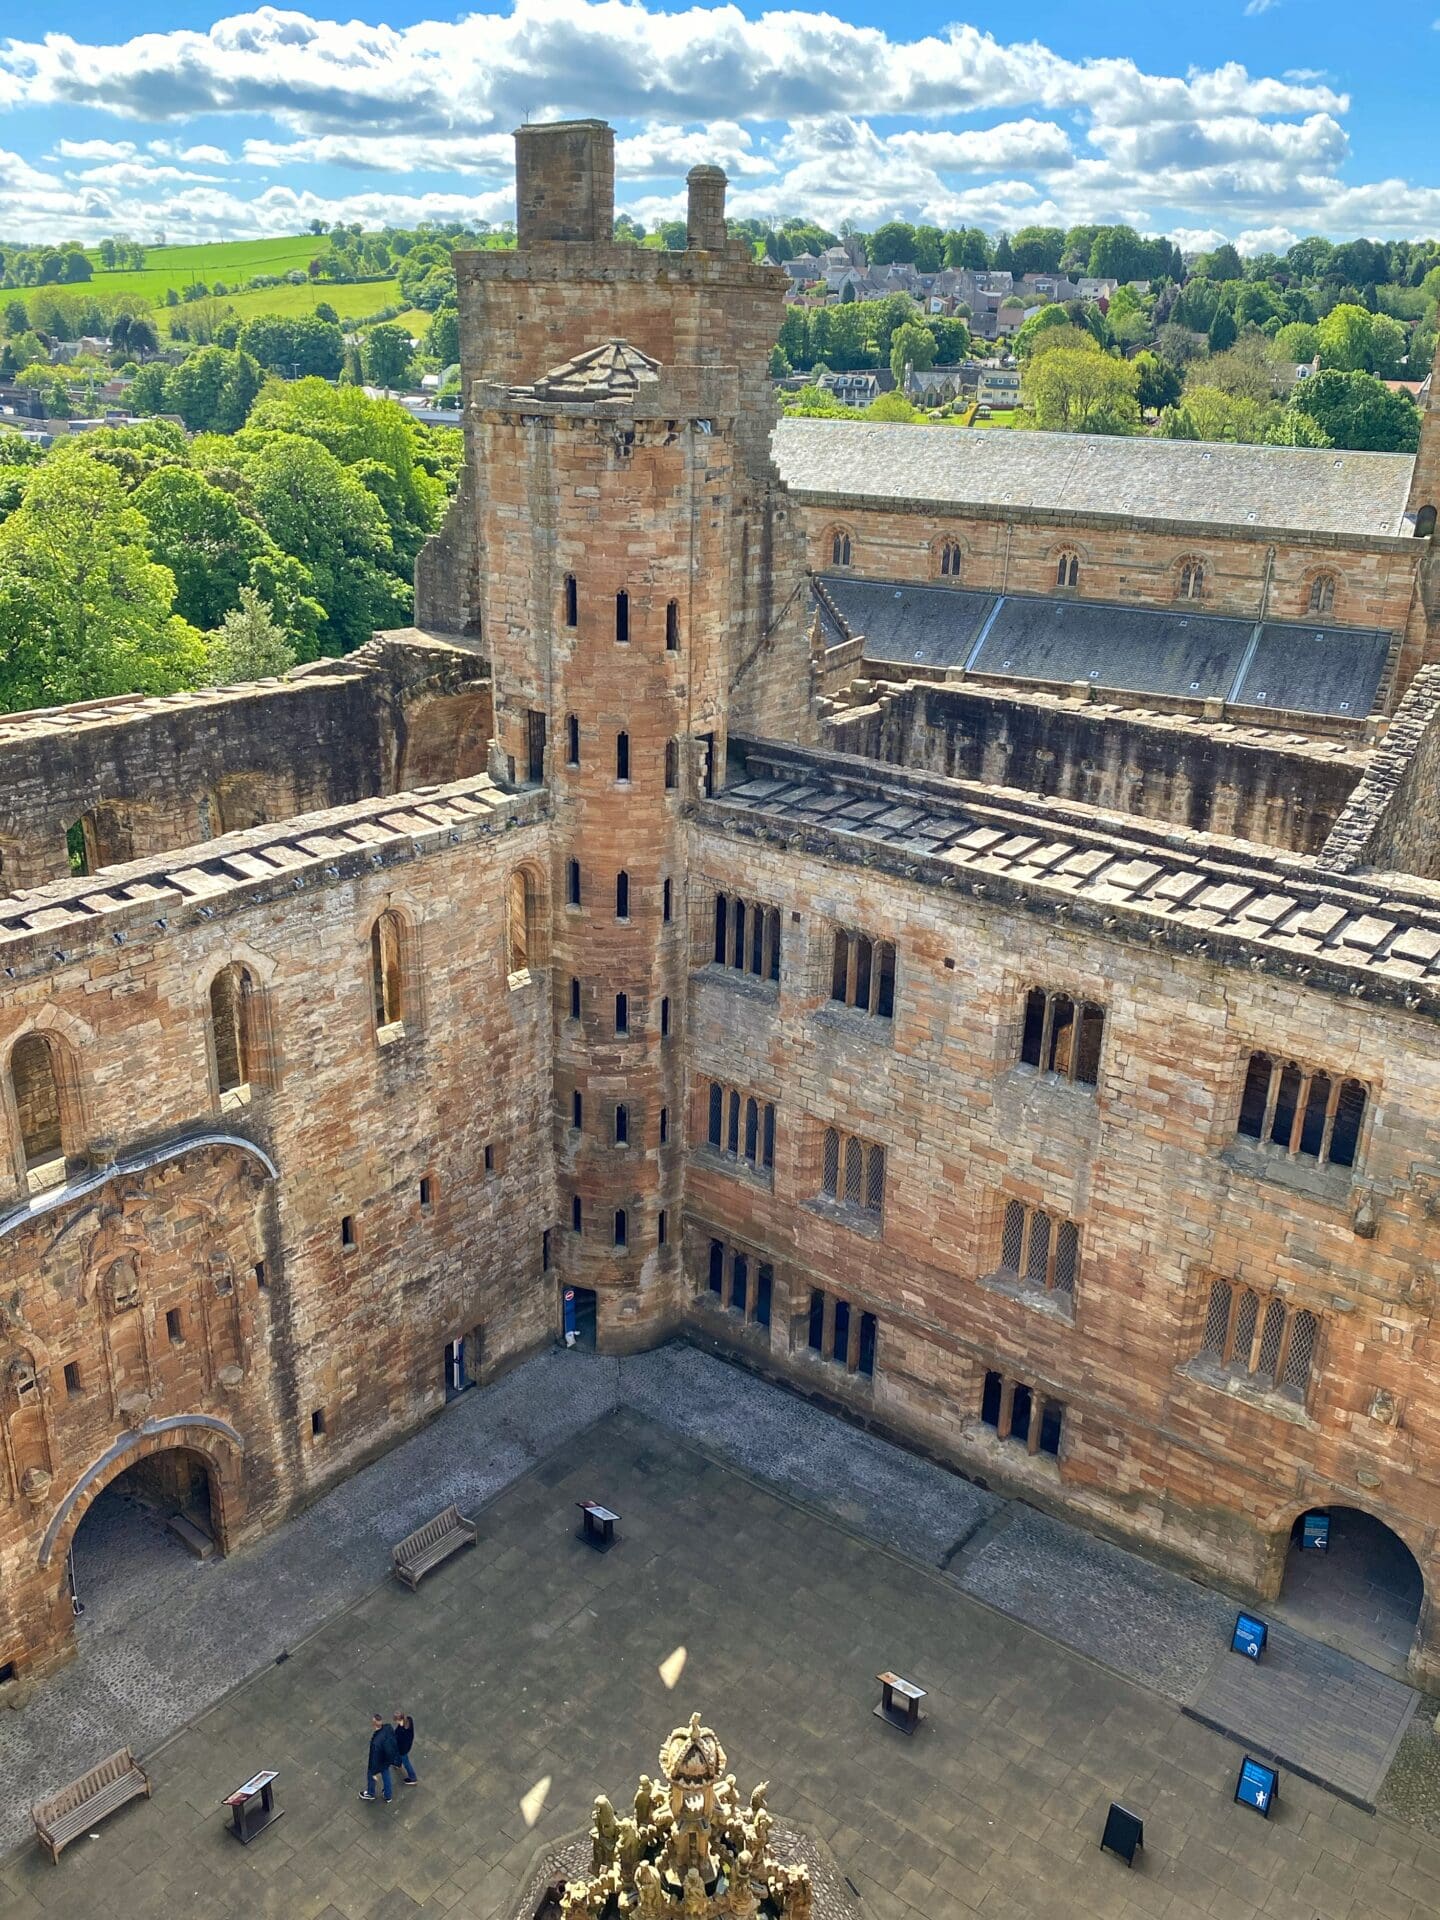 Looking down at Linlithgow Palace from the Queen's bower